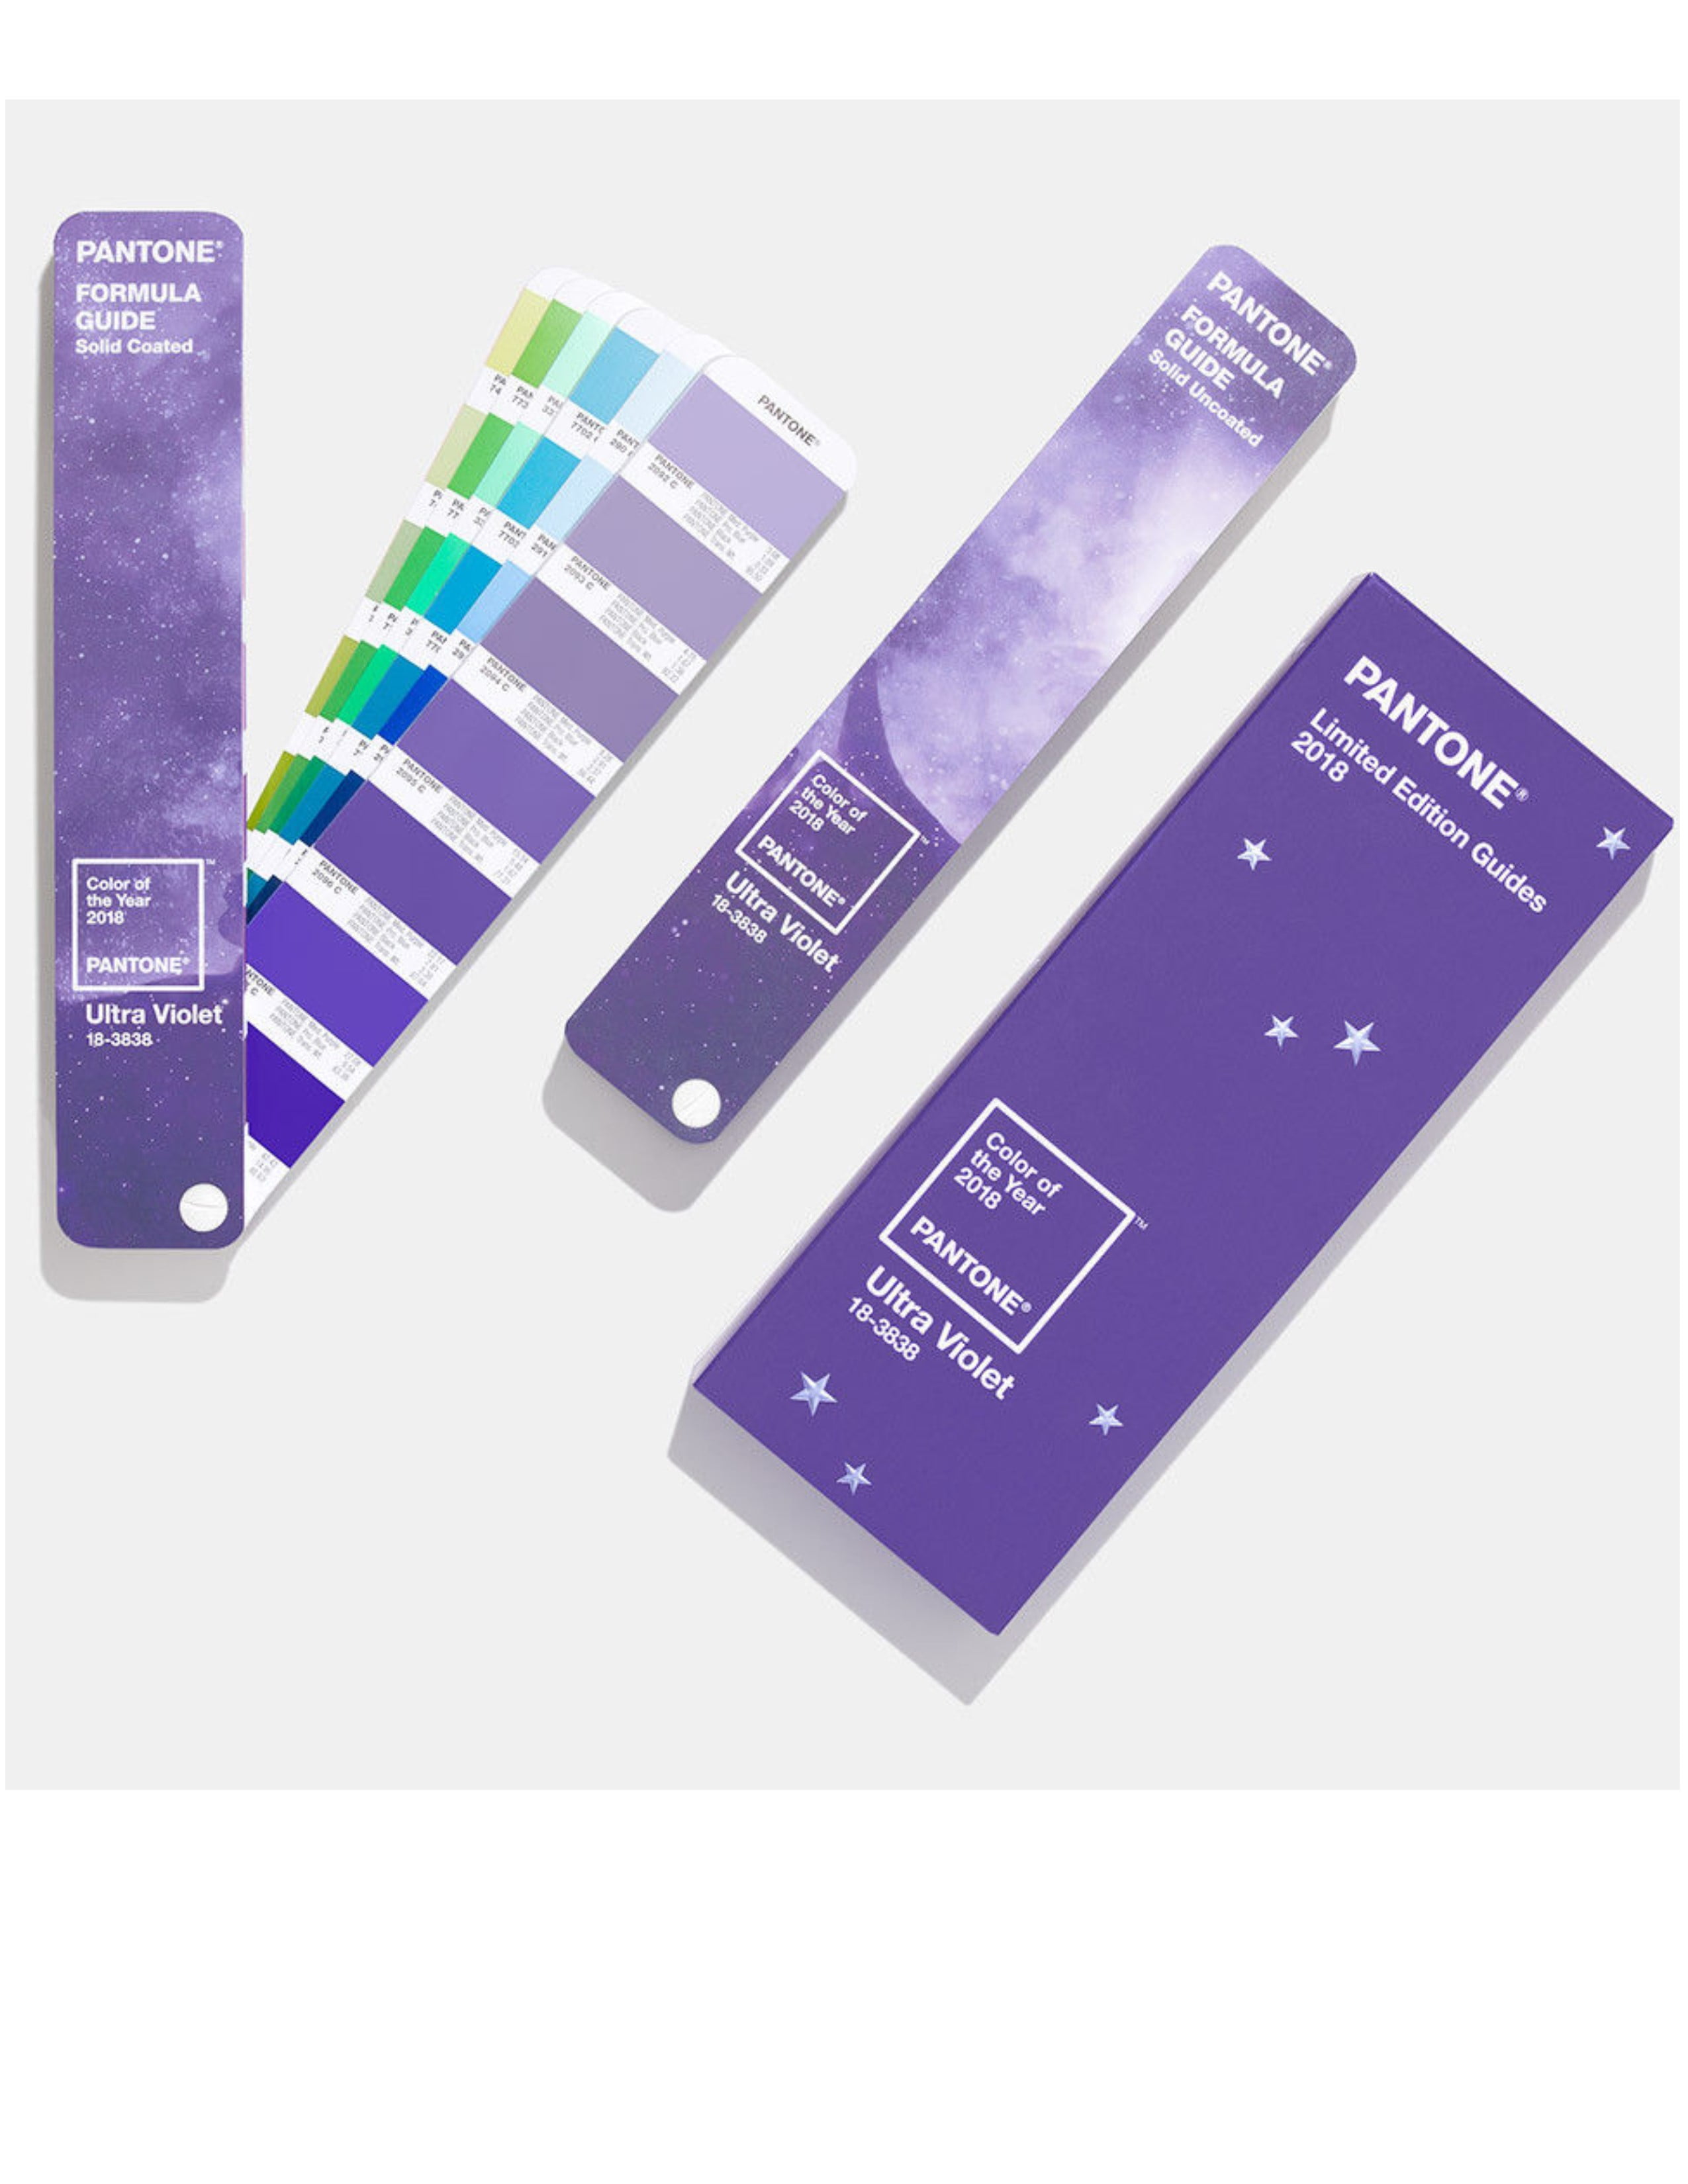 Pantone Formula Guide 2018 Color of the Year 